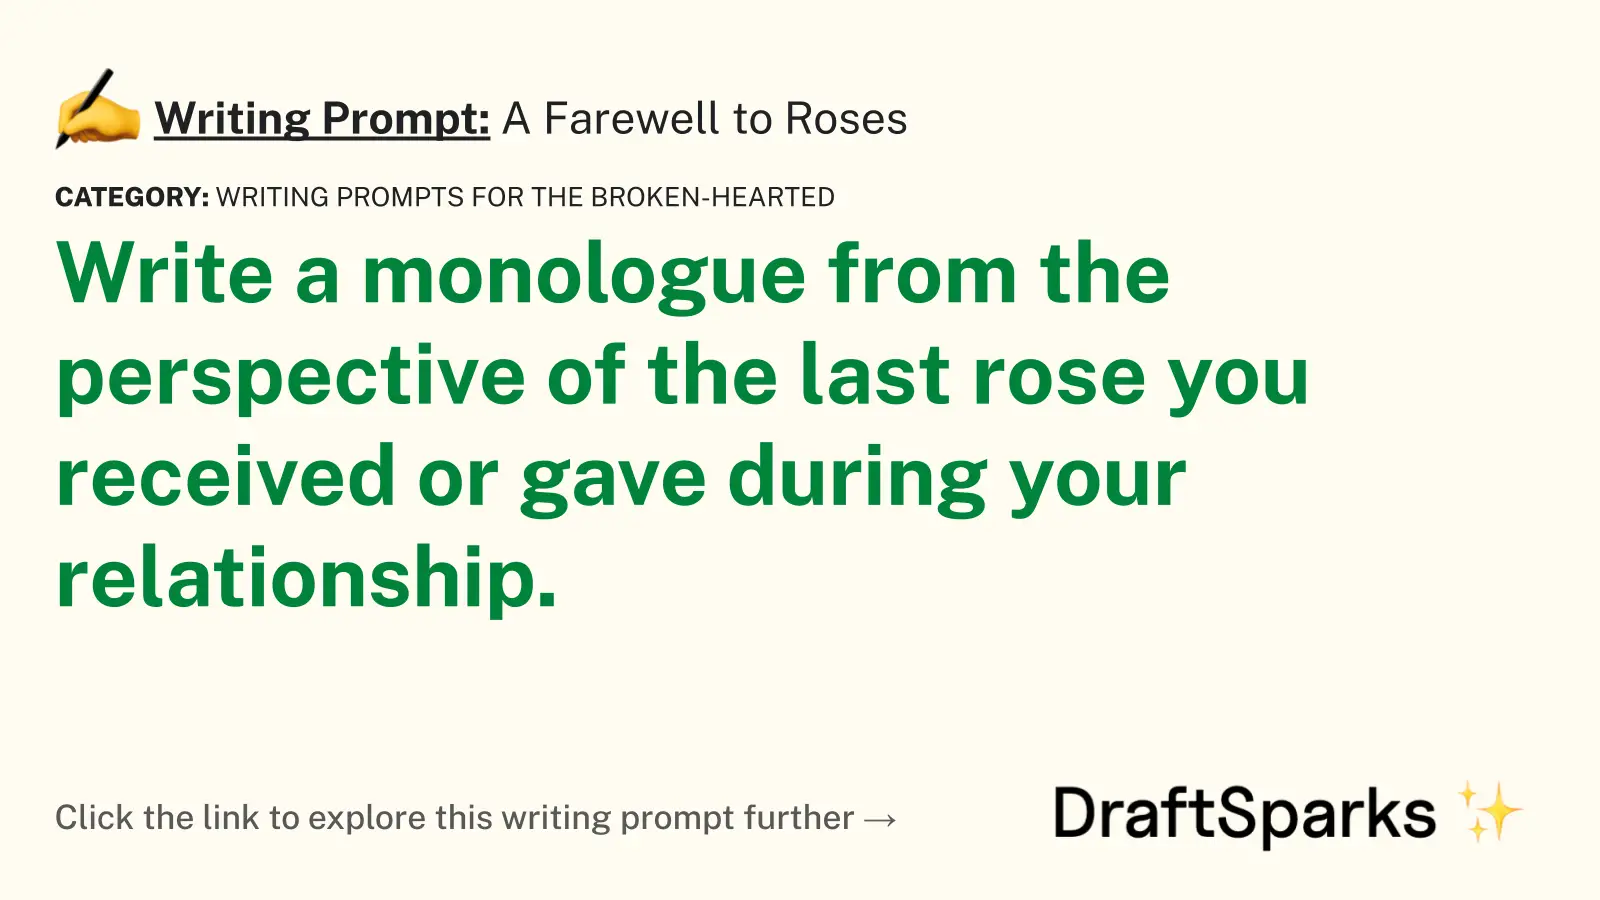 A Farewell to Roses